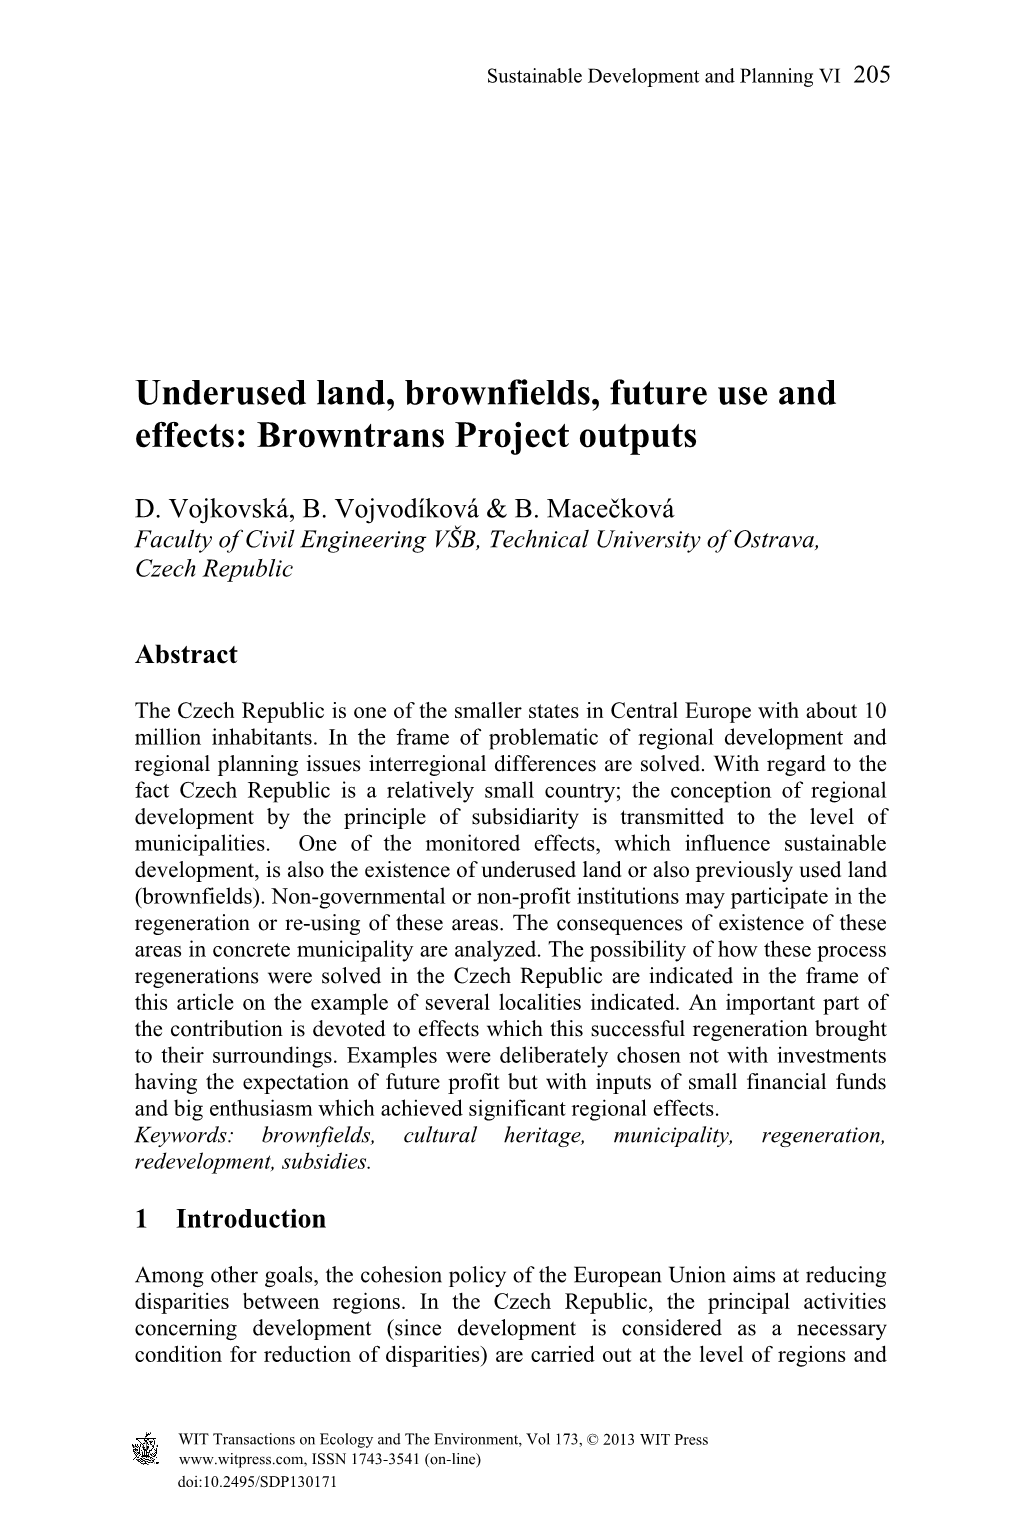 Underused Land, Brownfields, Future Use and Effects: Browntrans Project Outputs